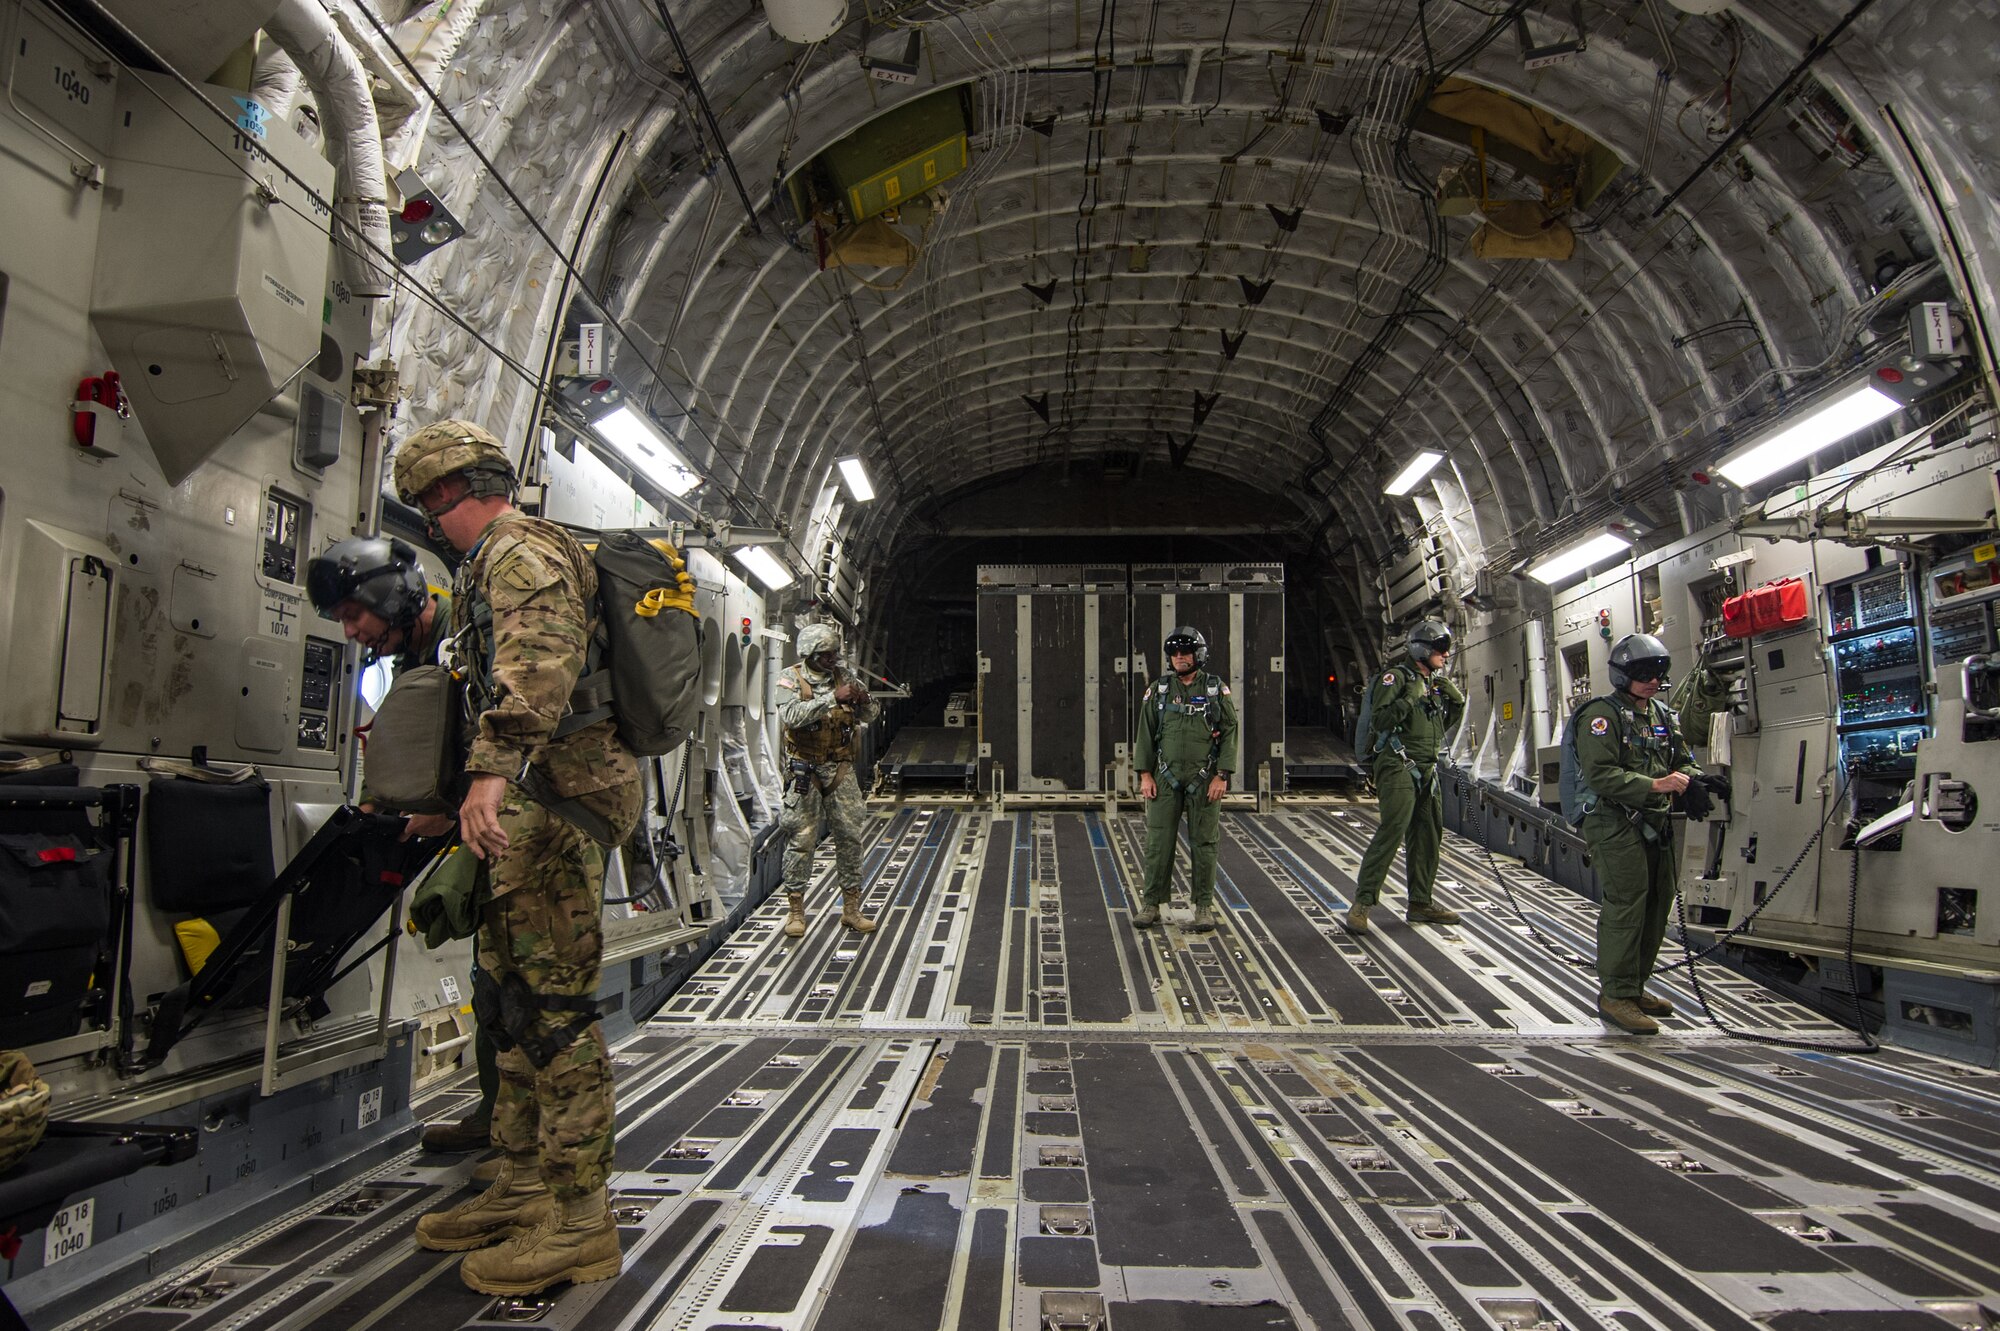 Loadmasters from the 701st Airlift Squadron at Joint Base Charleston, S.C. stand ready in a C-17 Globemaster III during a flight over Lawson Army Airfield, Fort Benning, Ga. Aug. 15, 2015. Reserve aircrews from the 701st and 300th AS flew two C-17s during Fort Benning’s celebration of the 75th anniversary of the U.S. Army Airborne School. Almost 300 paratroopers took the big leap in the day’s event. (U.S. Air Force photo by Staff Sgt. Bobby Pilch)